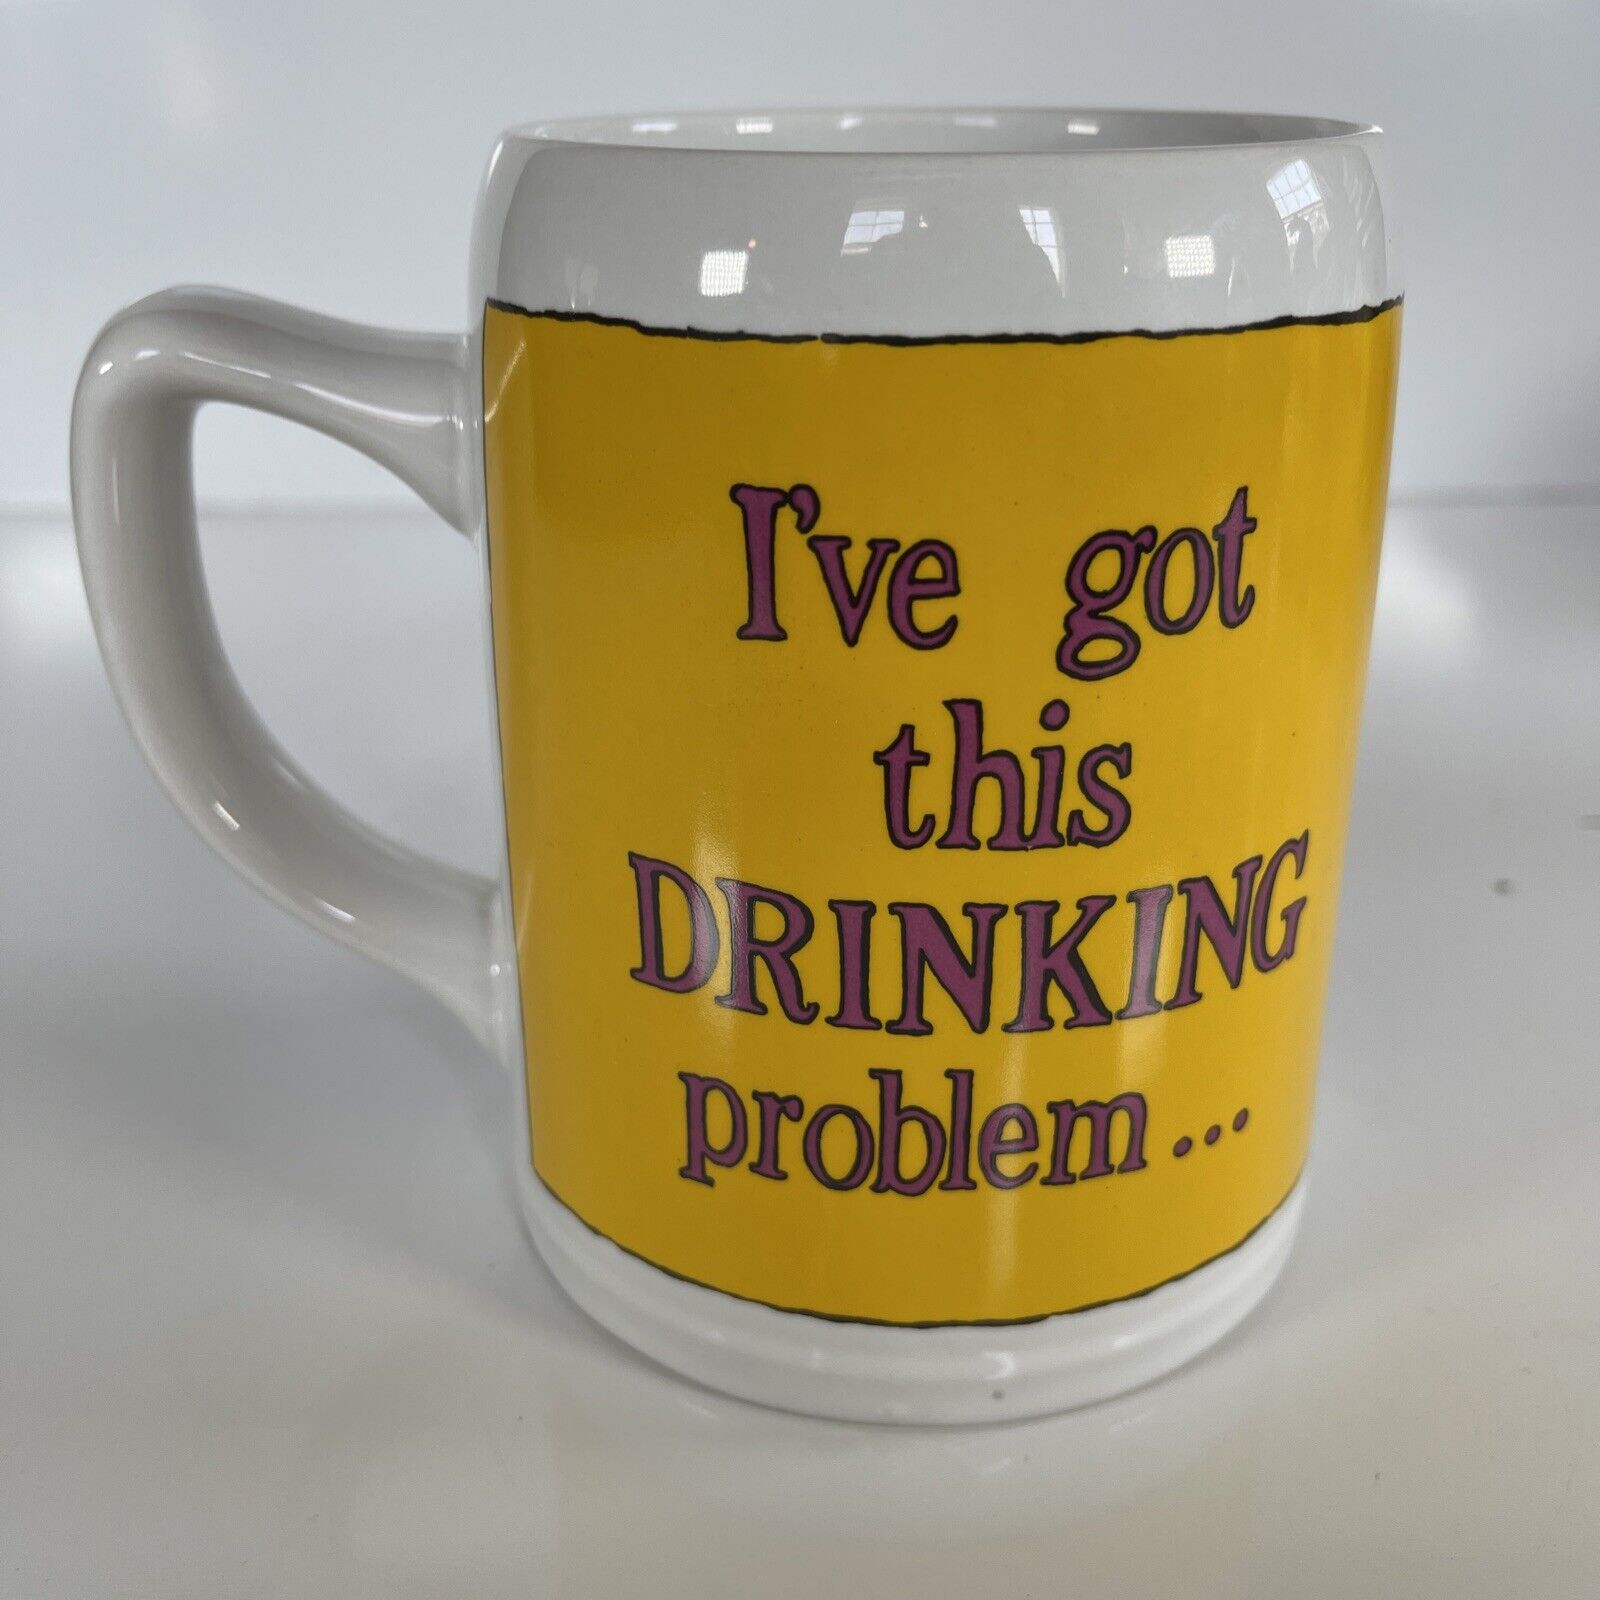 Recycled Paper Products Beer Mug Ive Got This Drinking Problem Ceramic Cup 18 oz